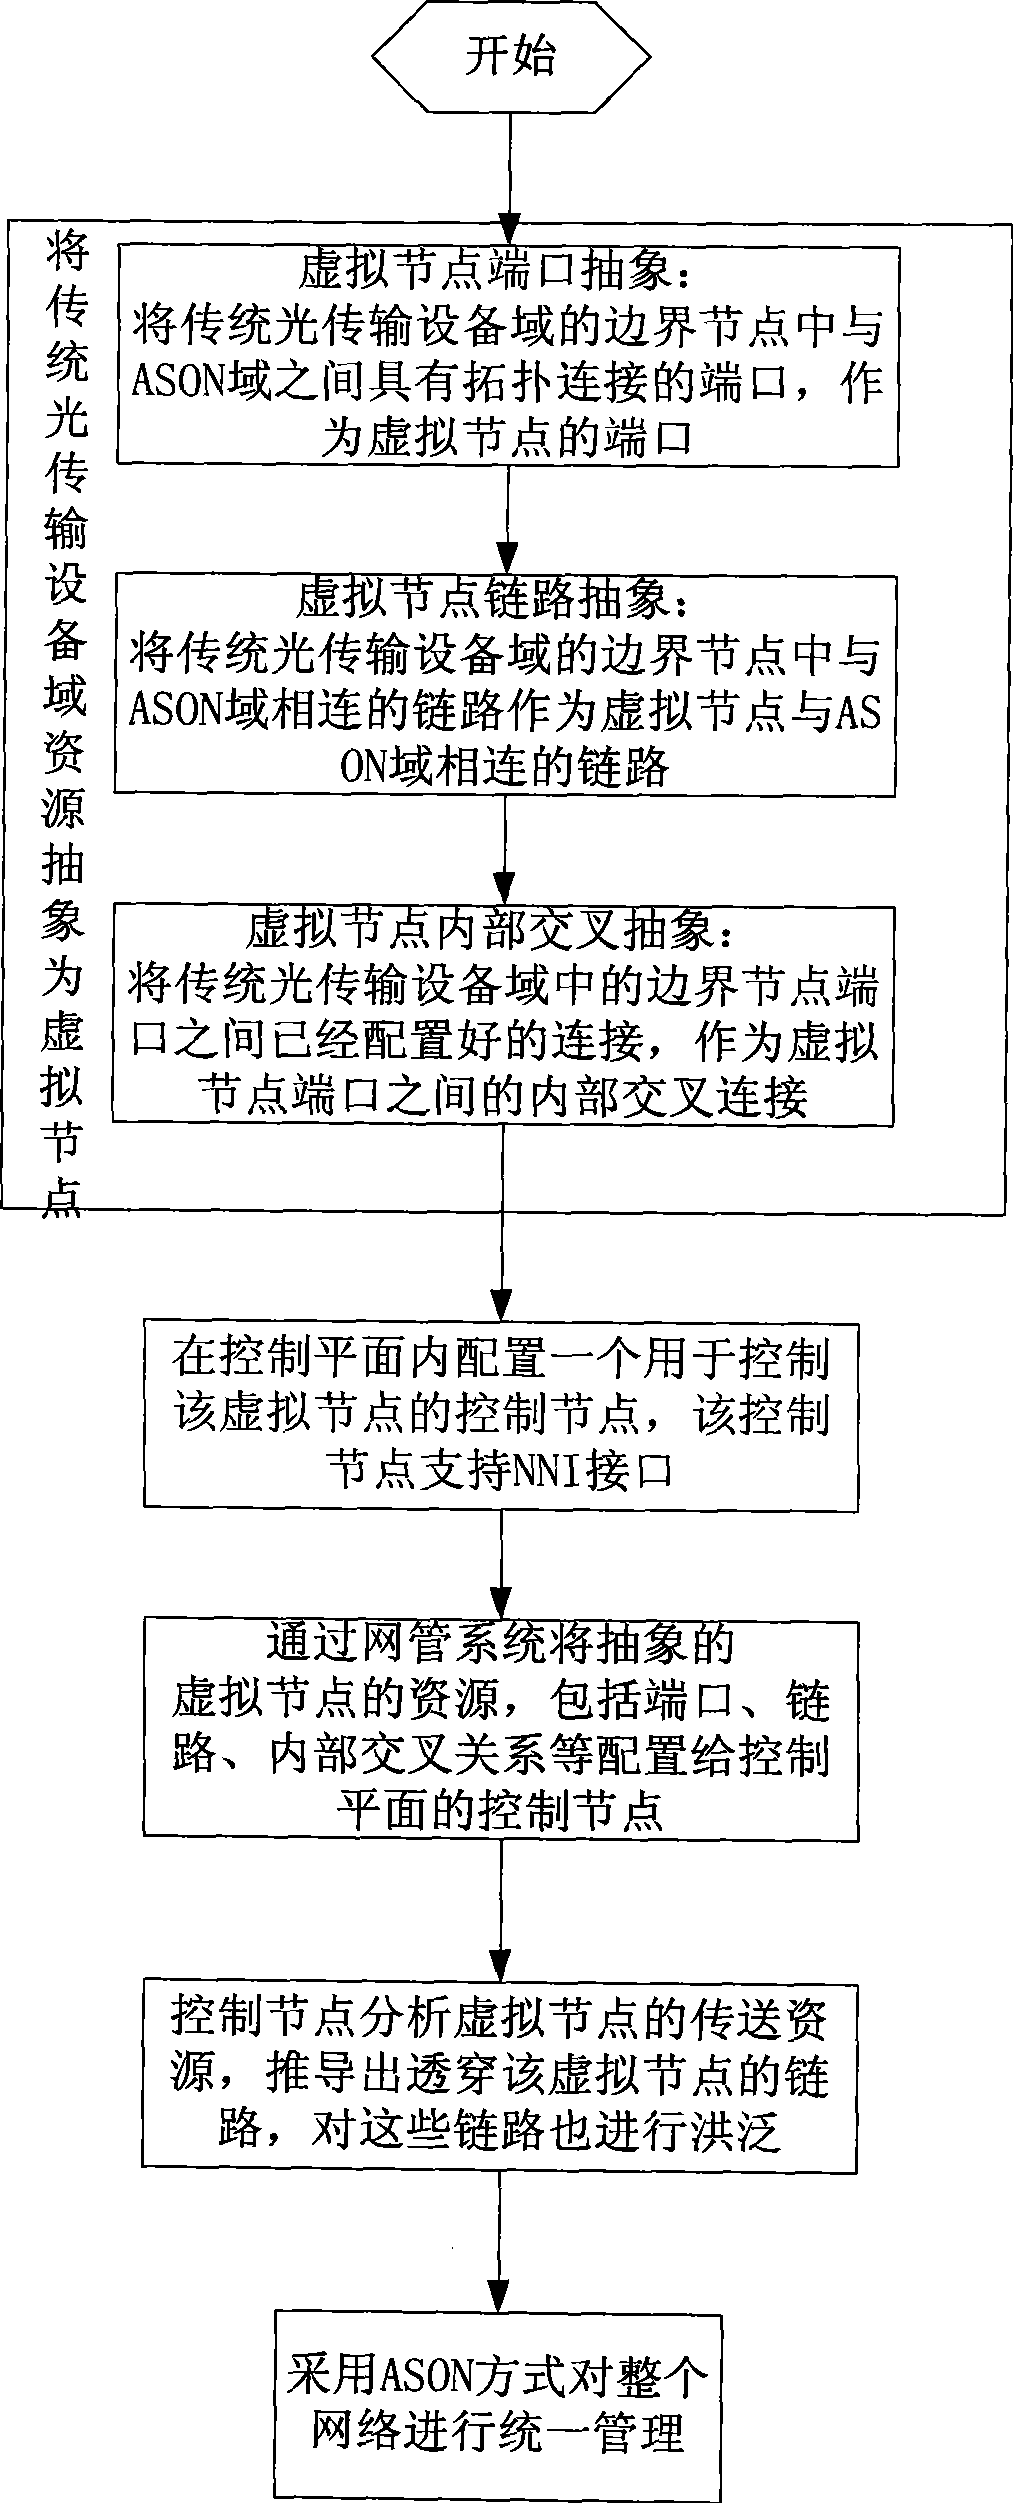 Method for interconnecting automatic switch optical network with traditional optical network